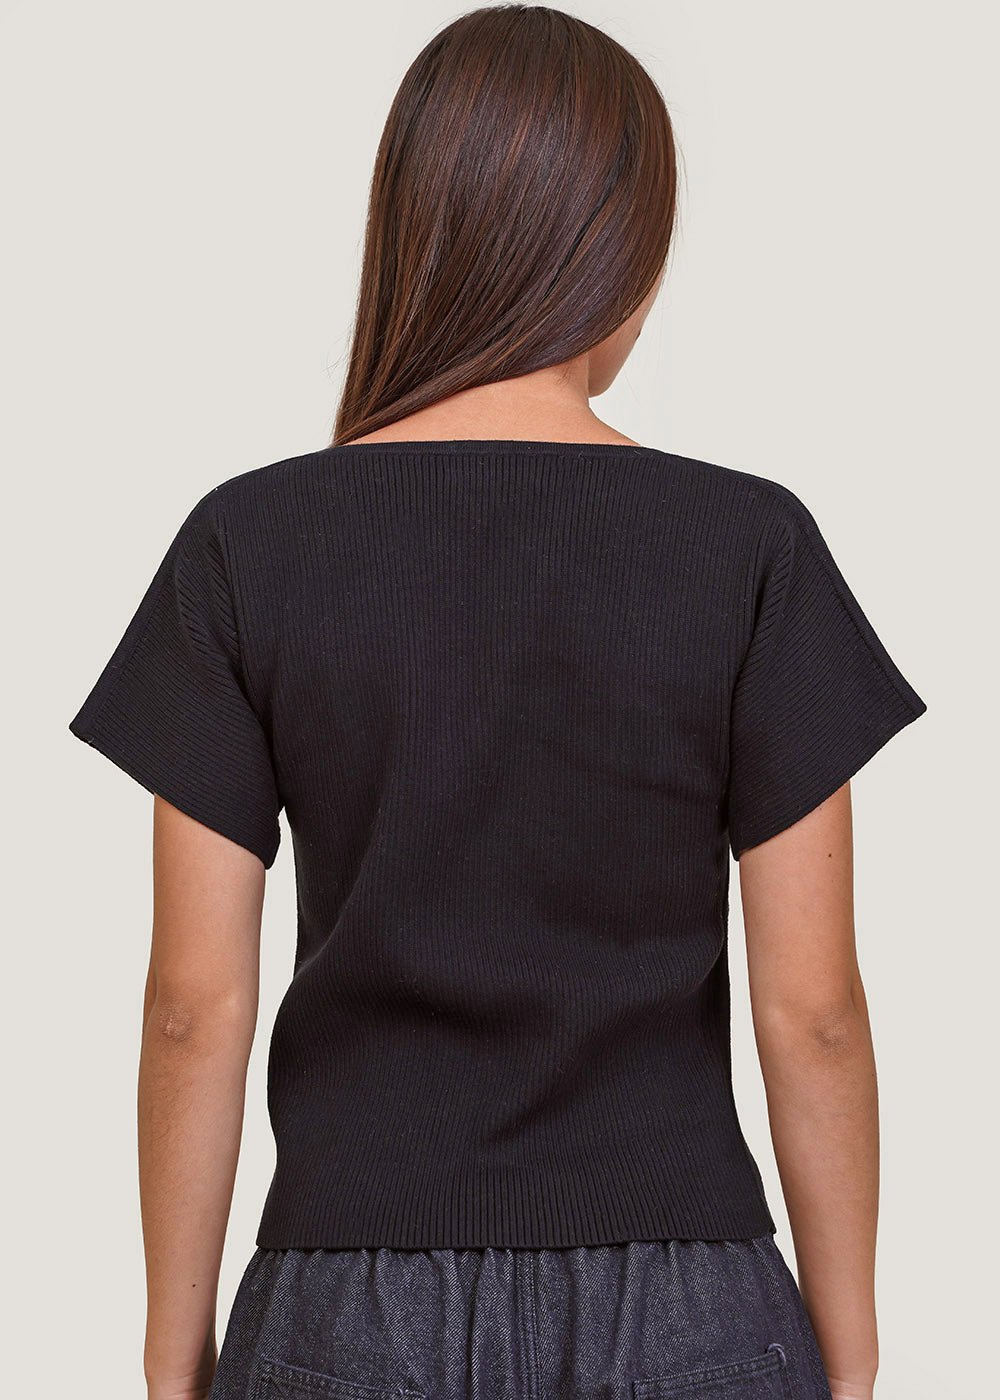 NIA THOMAS Black Mujer Top - New Classics Studios Sustainable Ethical Fashion Canada